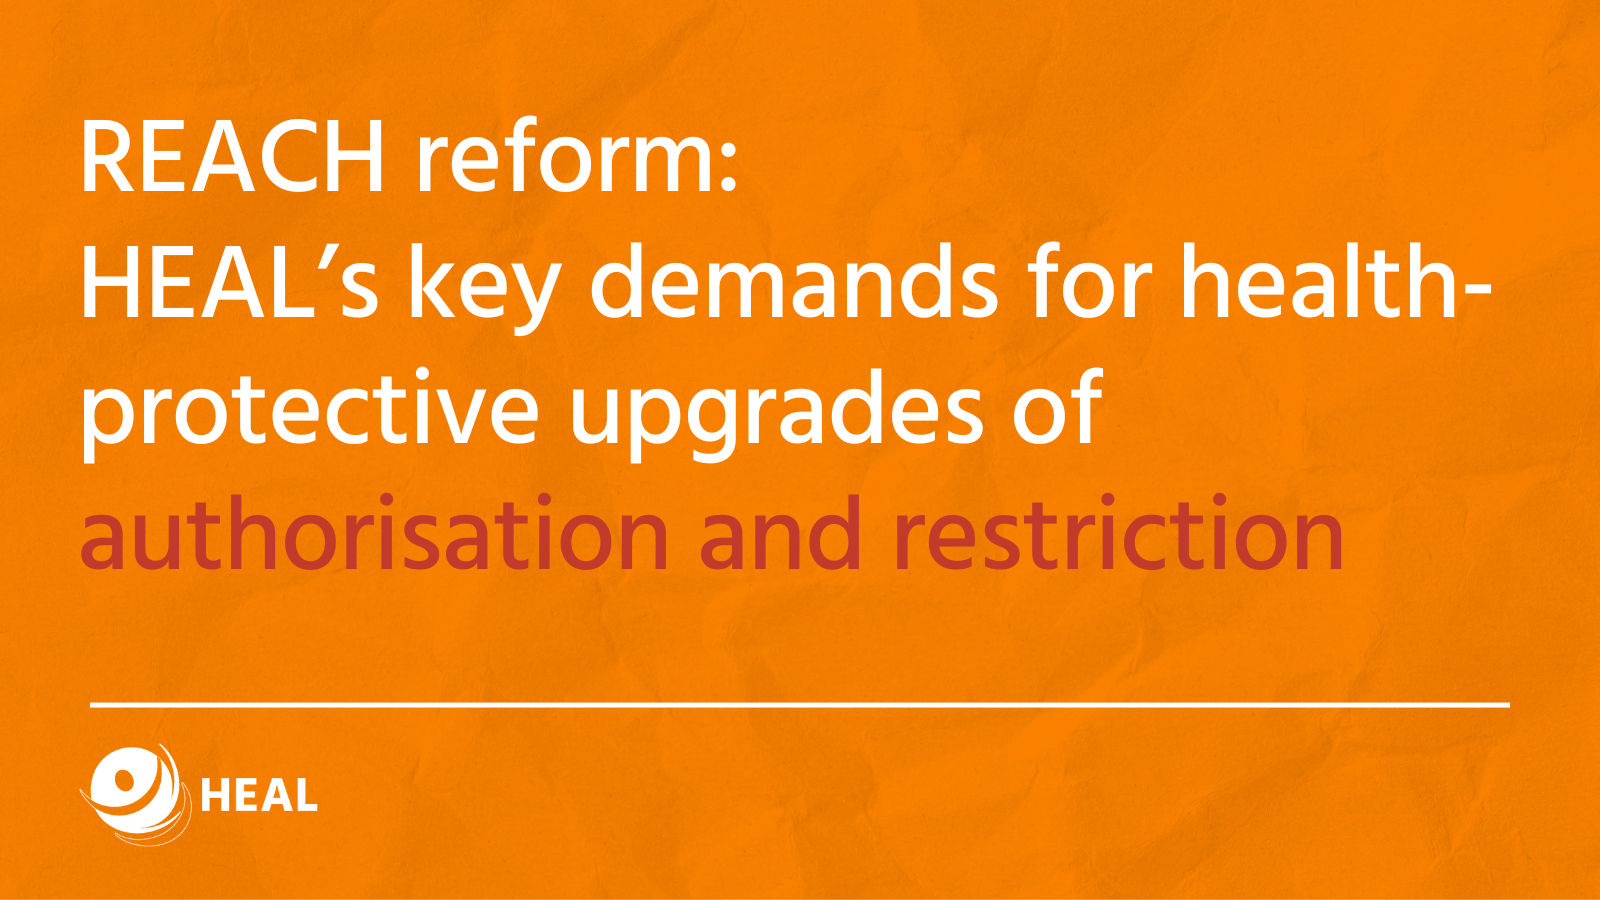 REACH reform: HEAL’s key demands for health-protective upgrades of authorisation and restriction